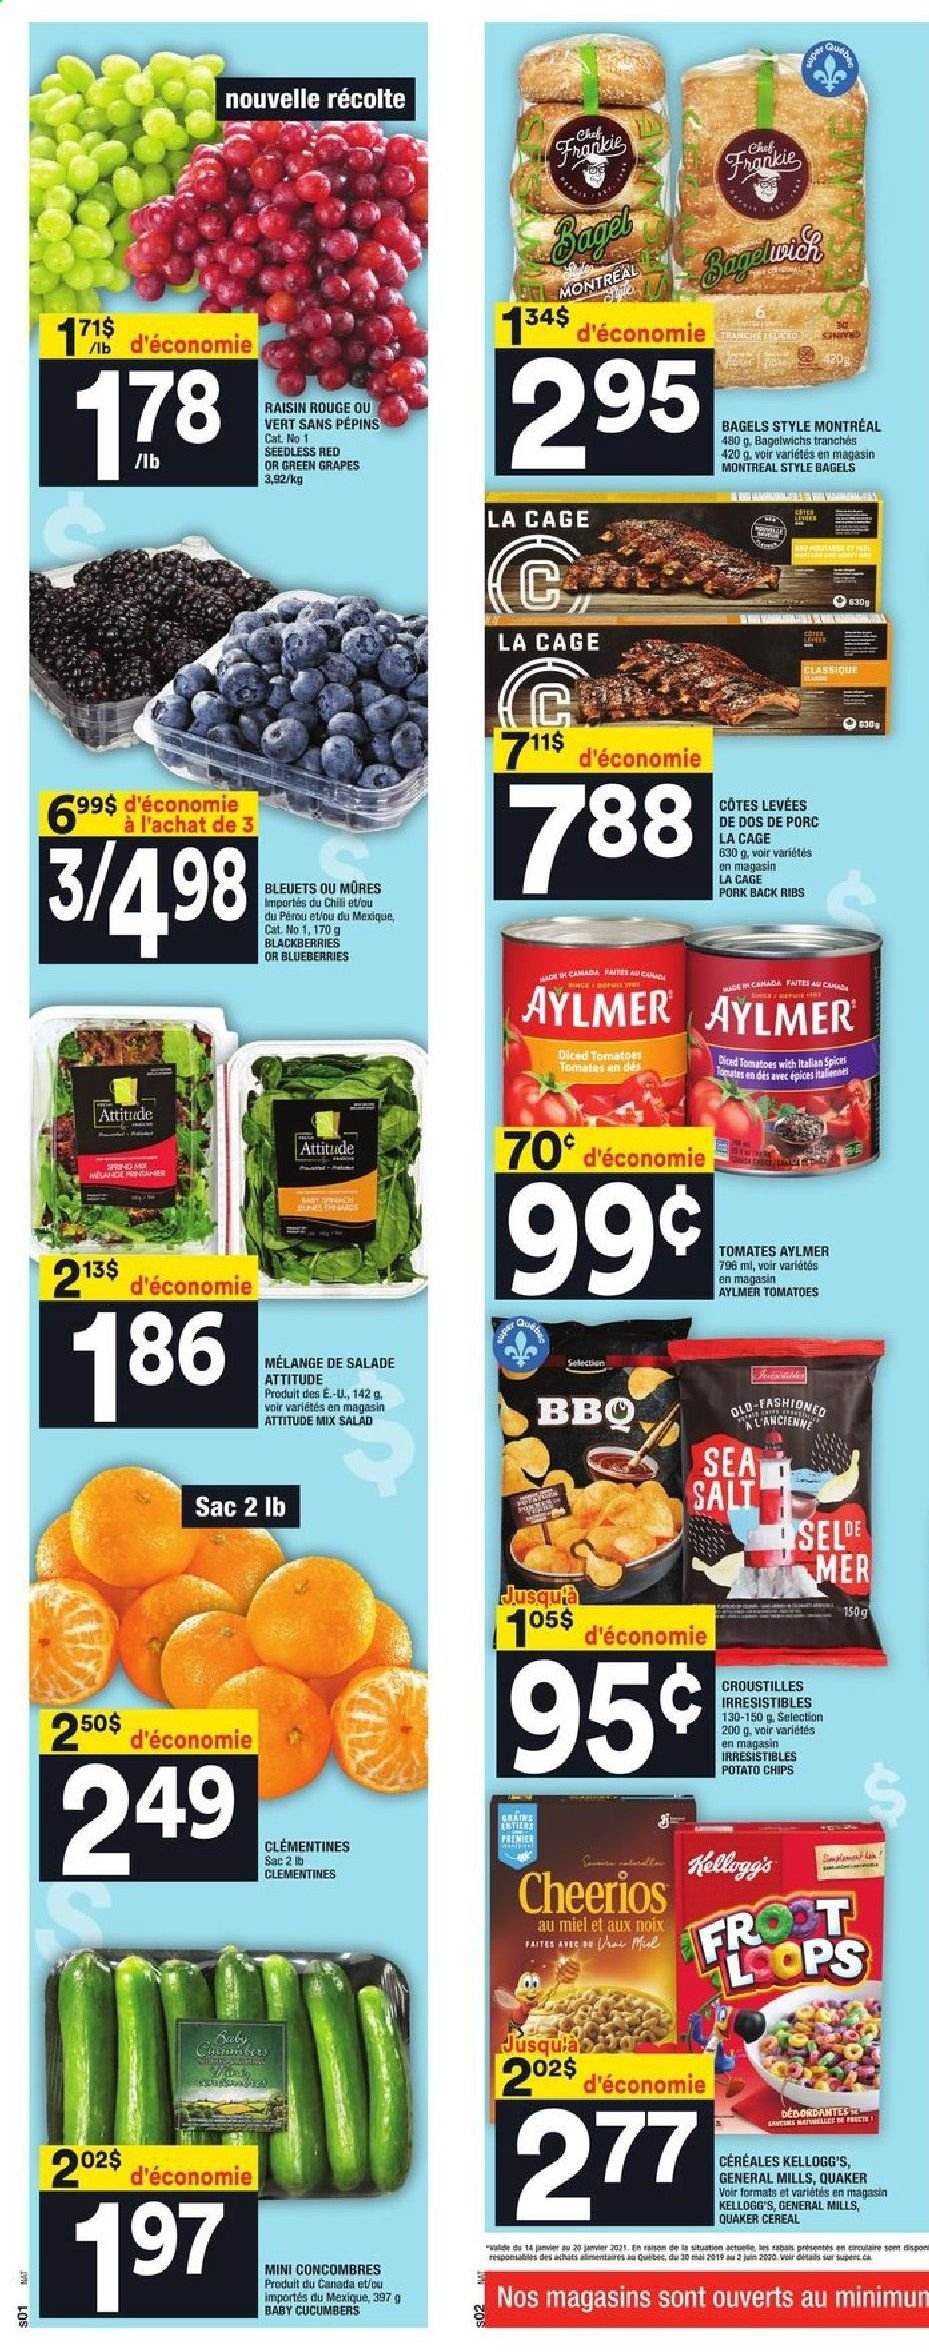 thumbnail - Super C Flyer - January 14, 2021 - January 20, 2021 - Sales products - bagels, cucumber, tomatoes, salad, blackberries, blueberries, clementines, grapes, Quaker, Kellogg's, cereals, Cheerios, pork meat, pork ribs, pork back ribs, chips. Page 12.